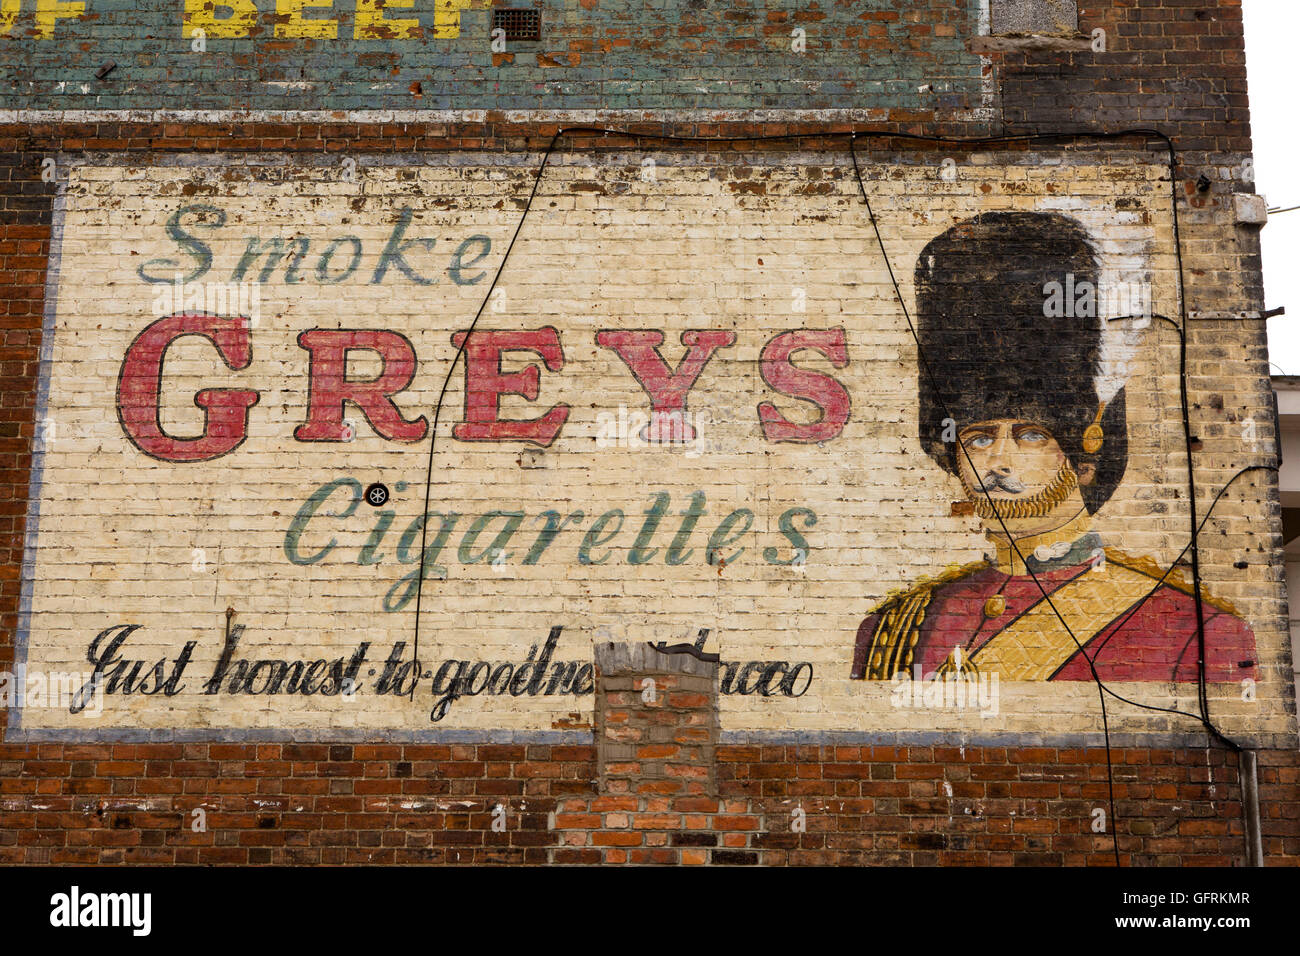 UK, England, Bedfordshire, Bedford, Western Street, old painted Grey's cigarette advertisement on gable wall Stock Photo